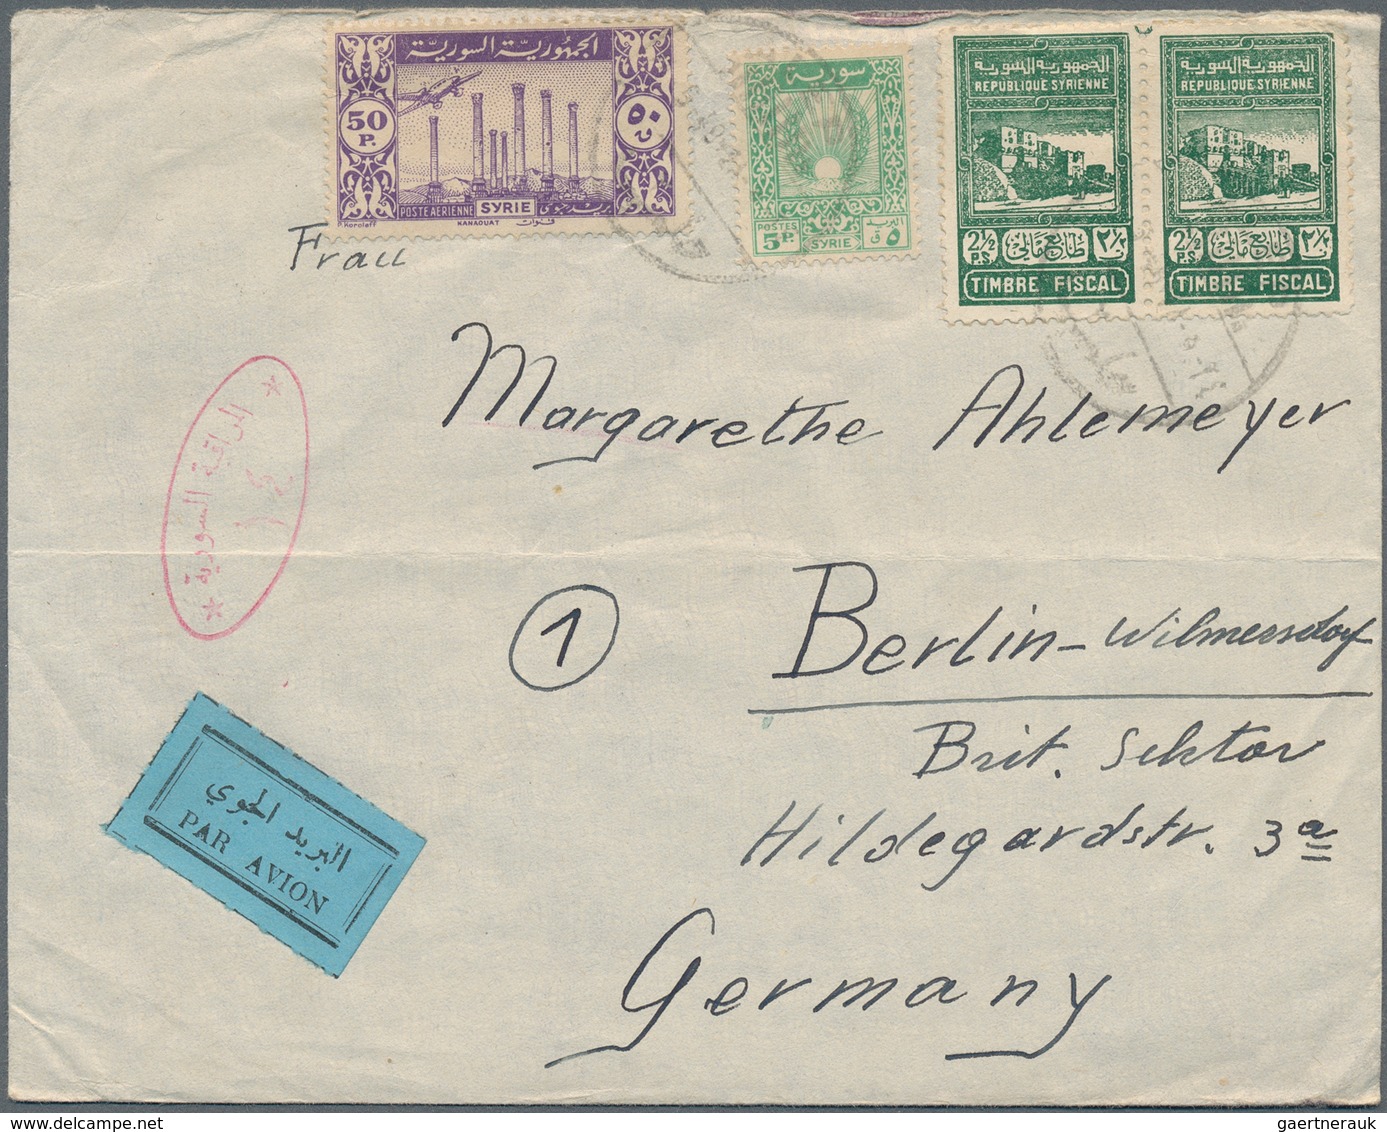 Syrien: 1892/1979 (ca.), covers (140) or used ppc (10) to foreign and mostly to Switzerland, Germany